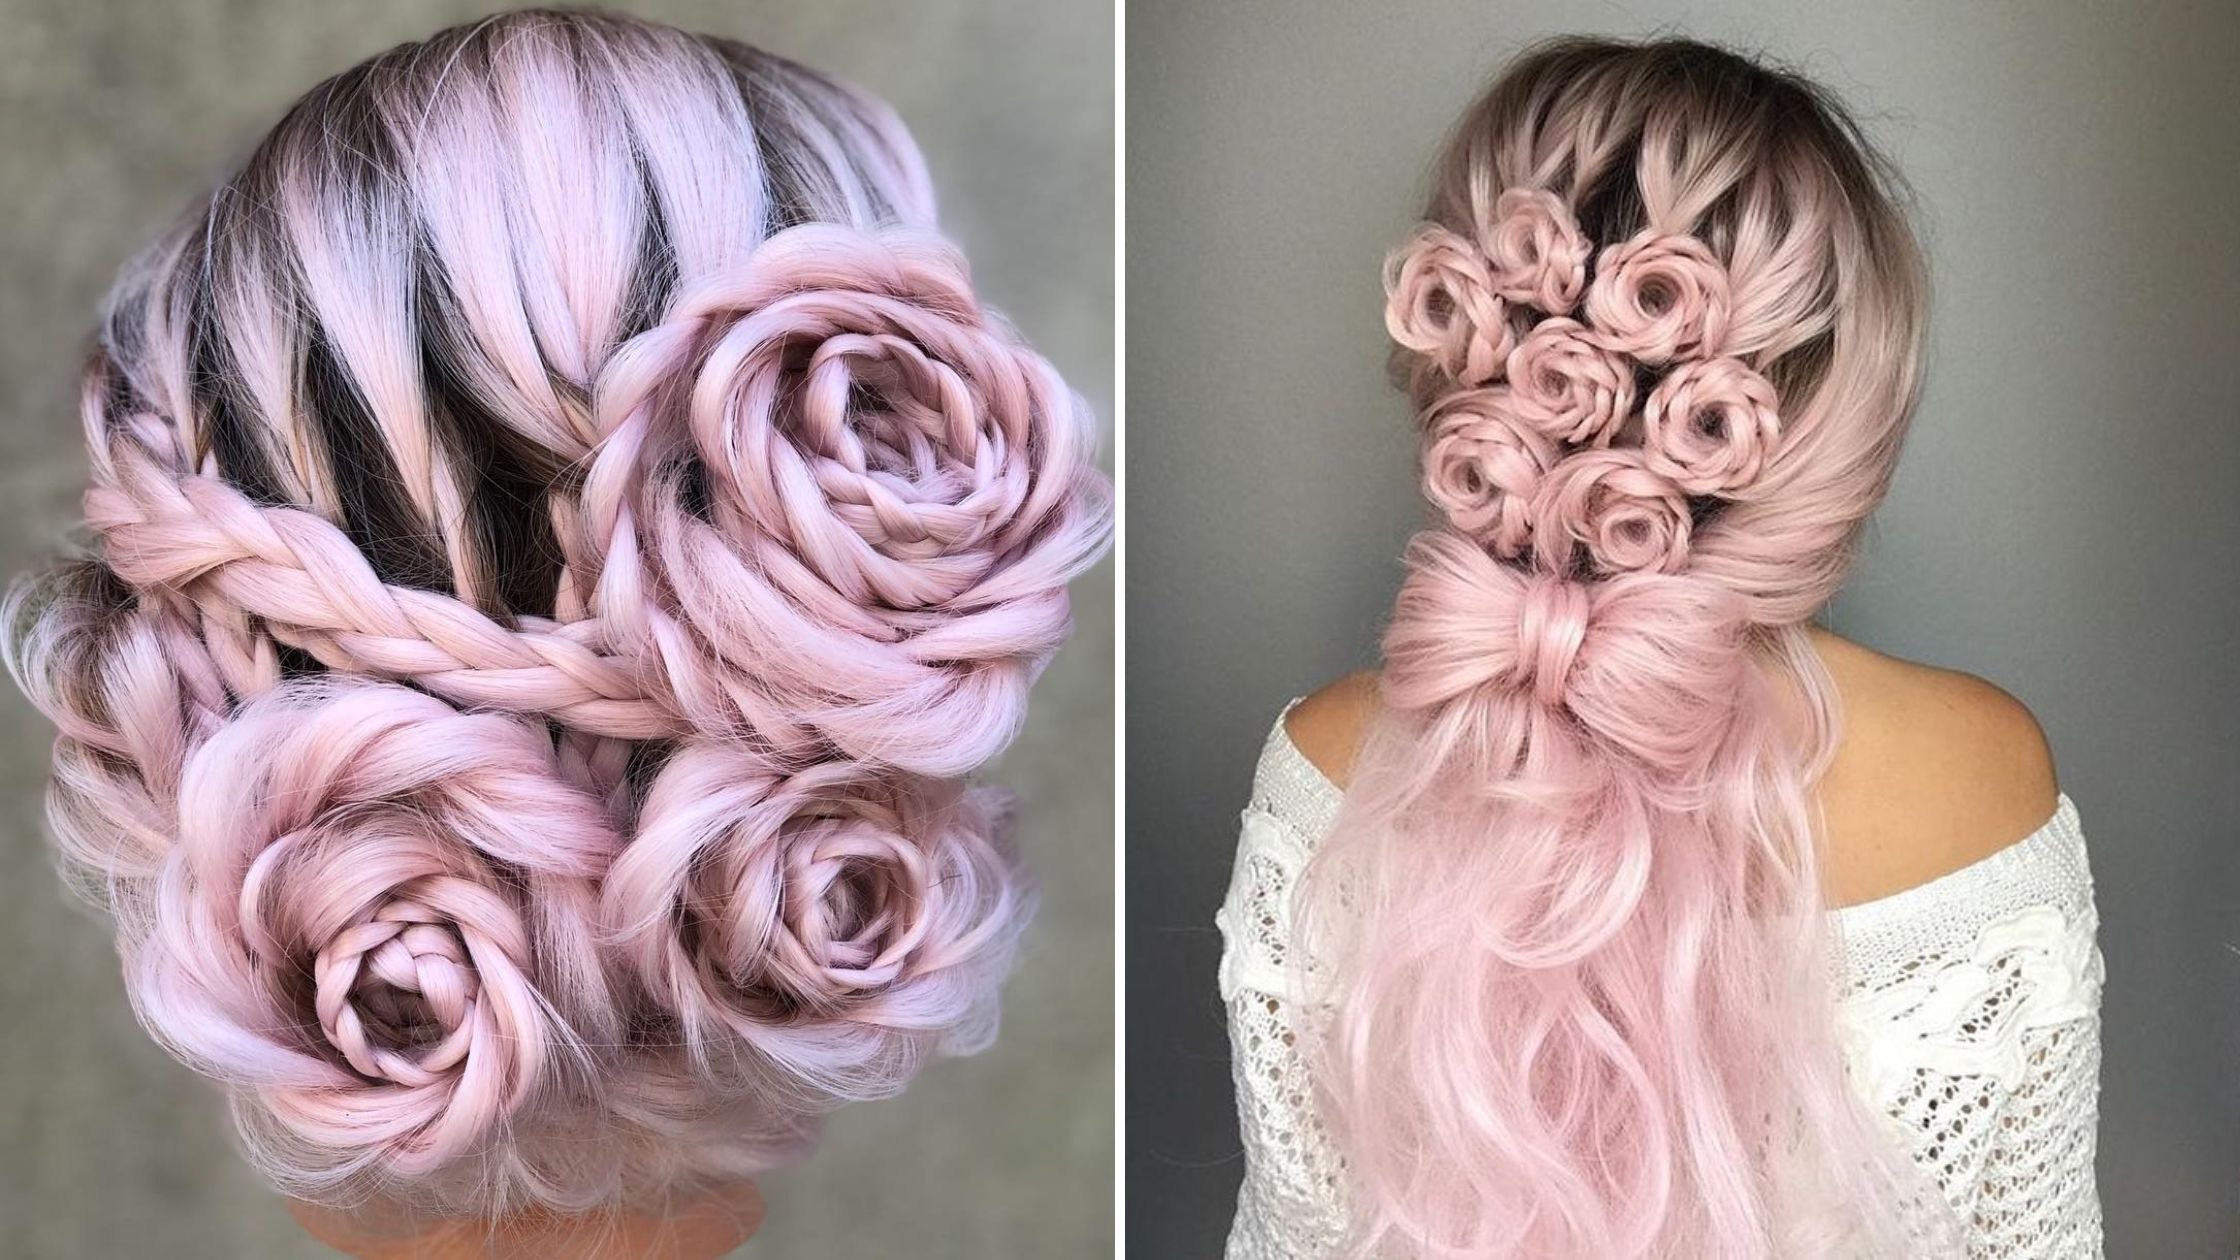 17 Rose Braid Hairstyles for Women